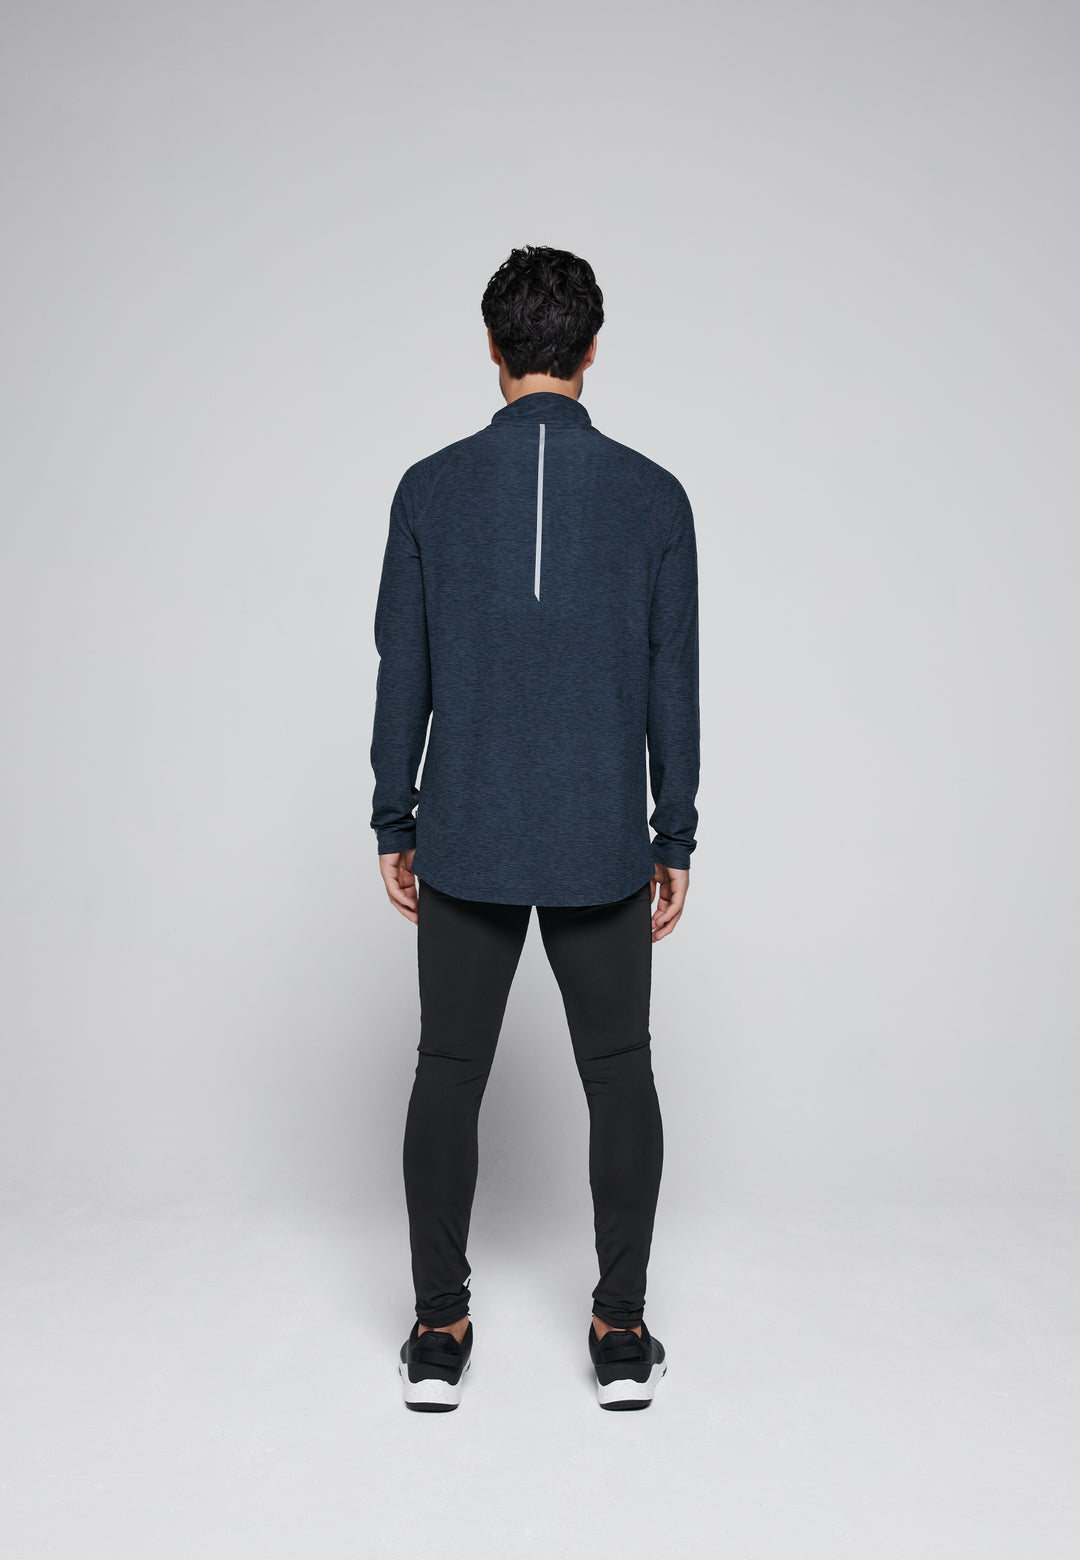 Men's running tight Dry-Cool - sustainable